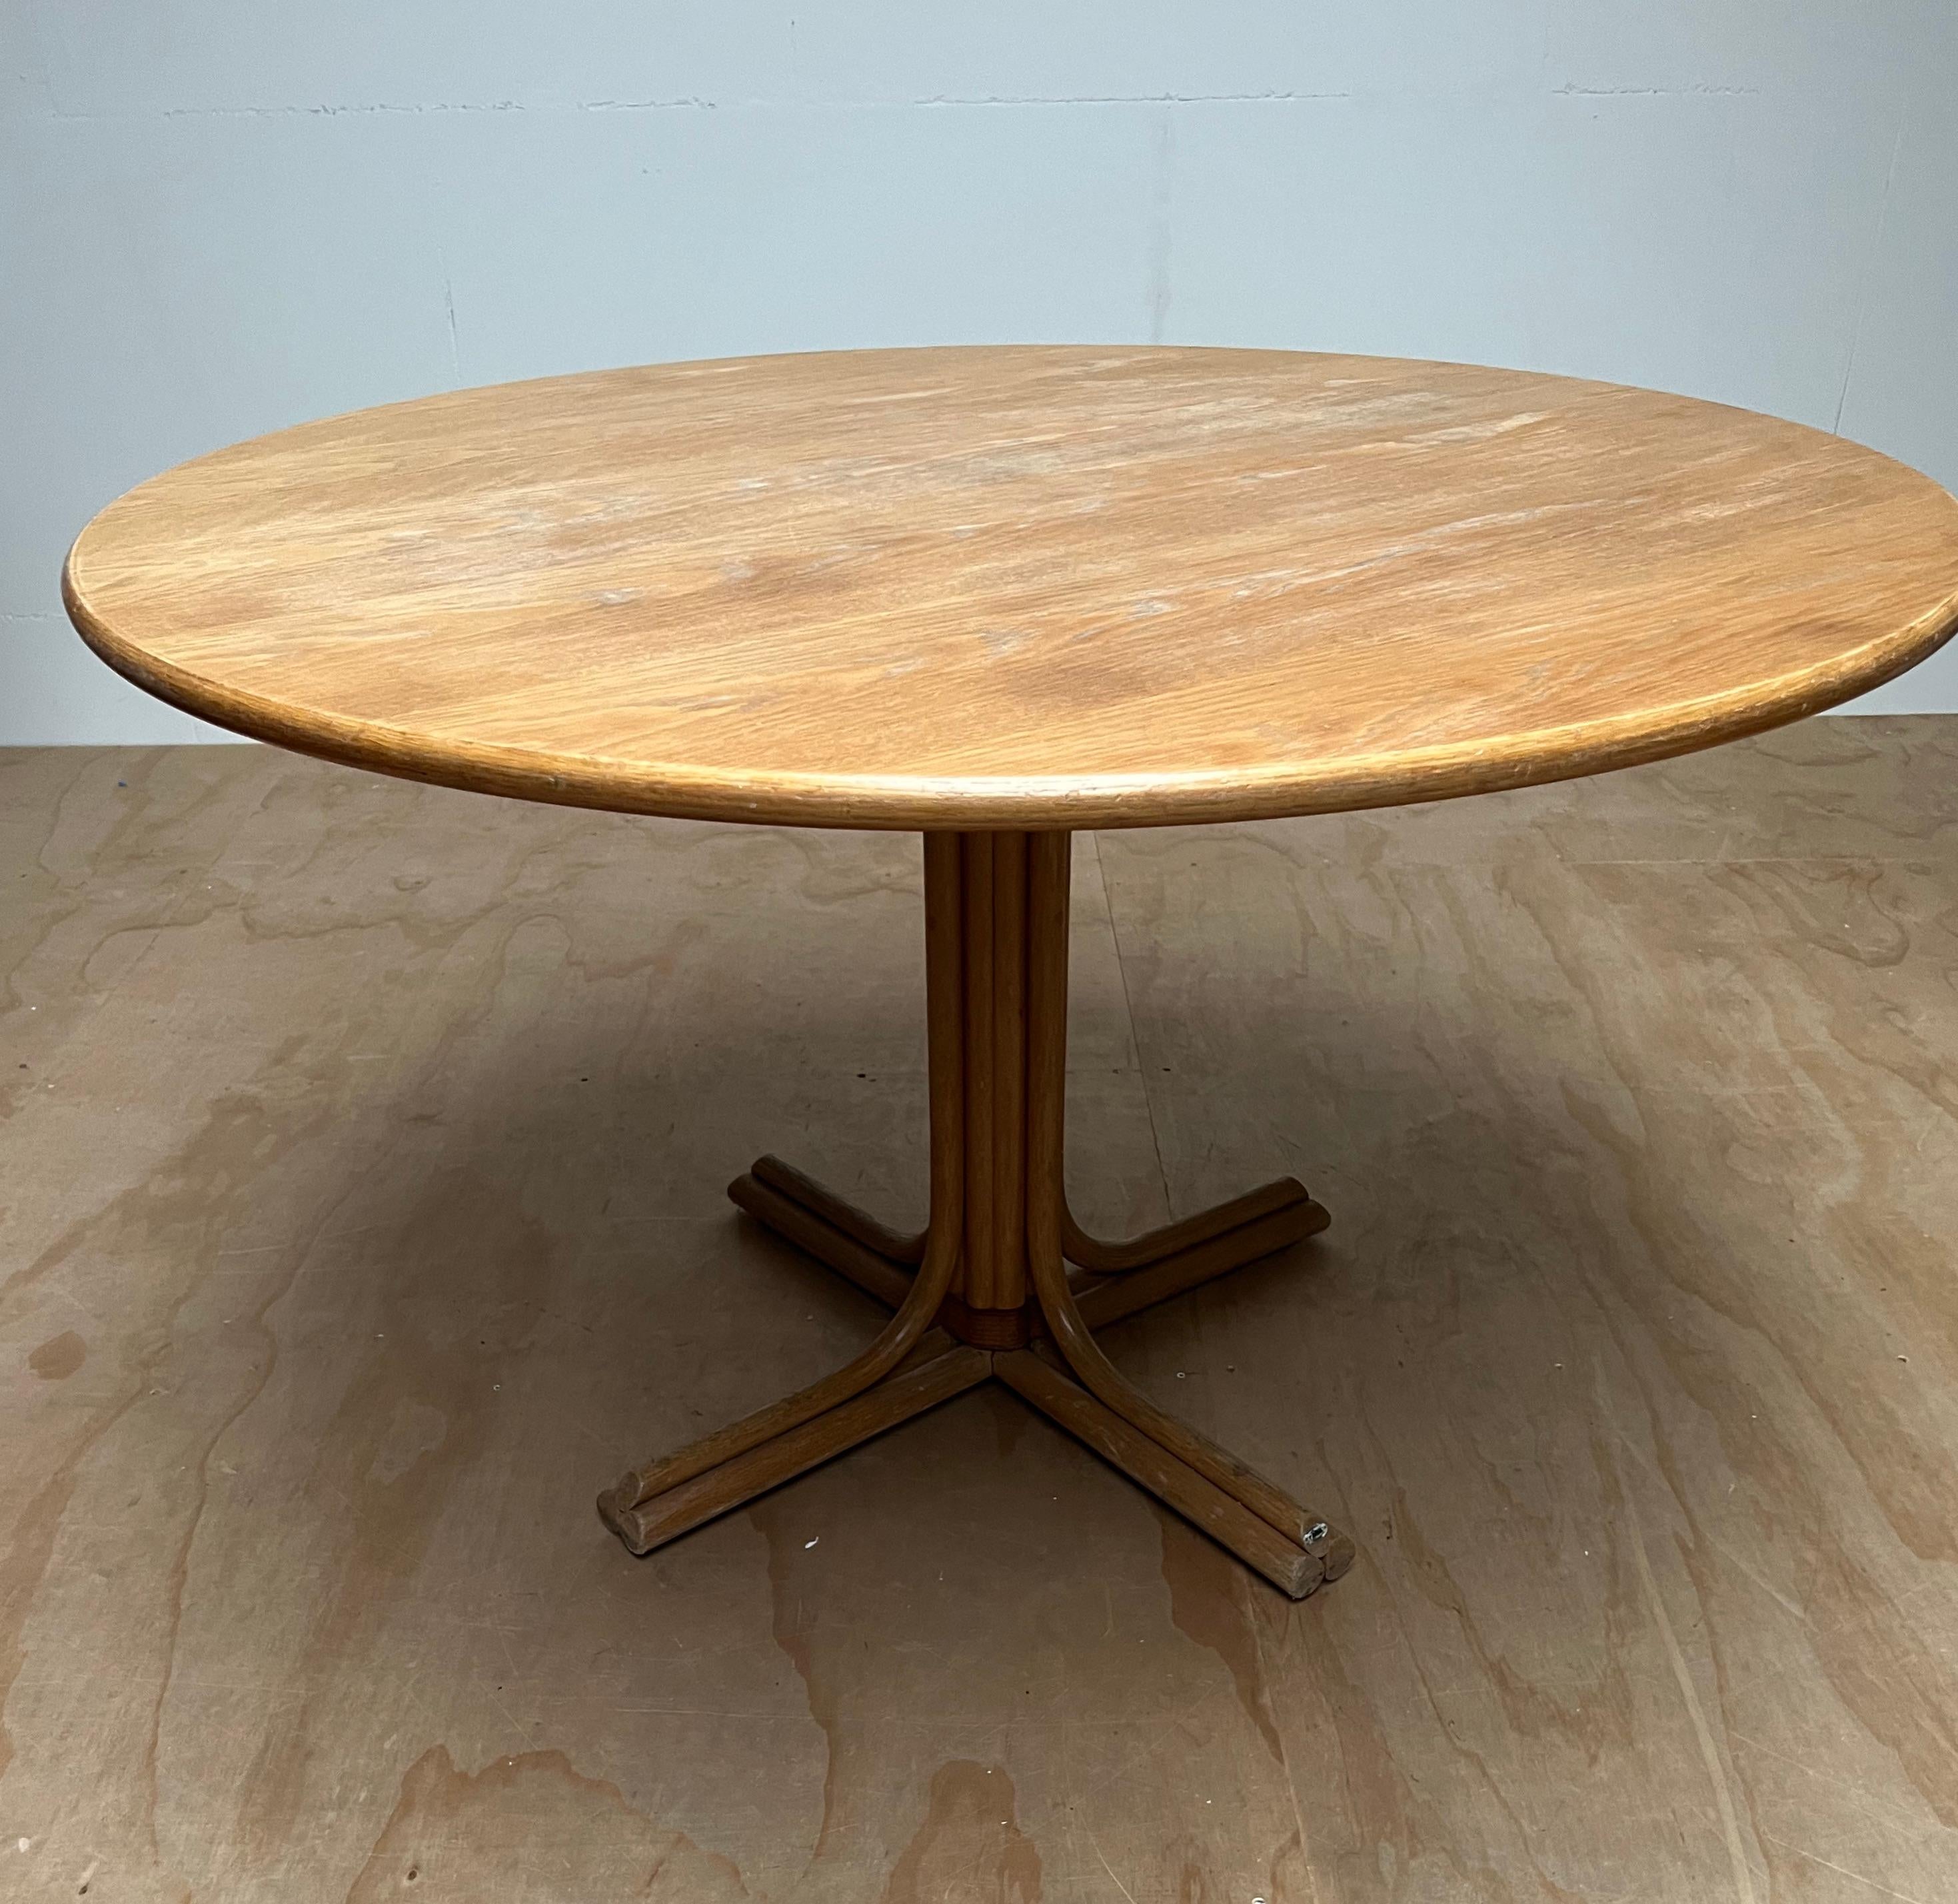 Rare Handcrafted & Stylish Mid-Century Modern Rattan, Leather & Oak Round Table For Sale 5